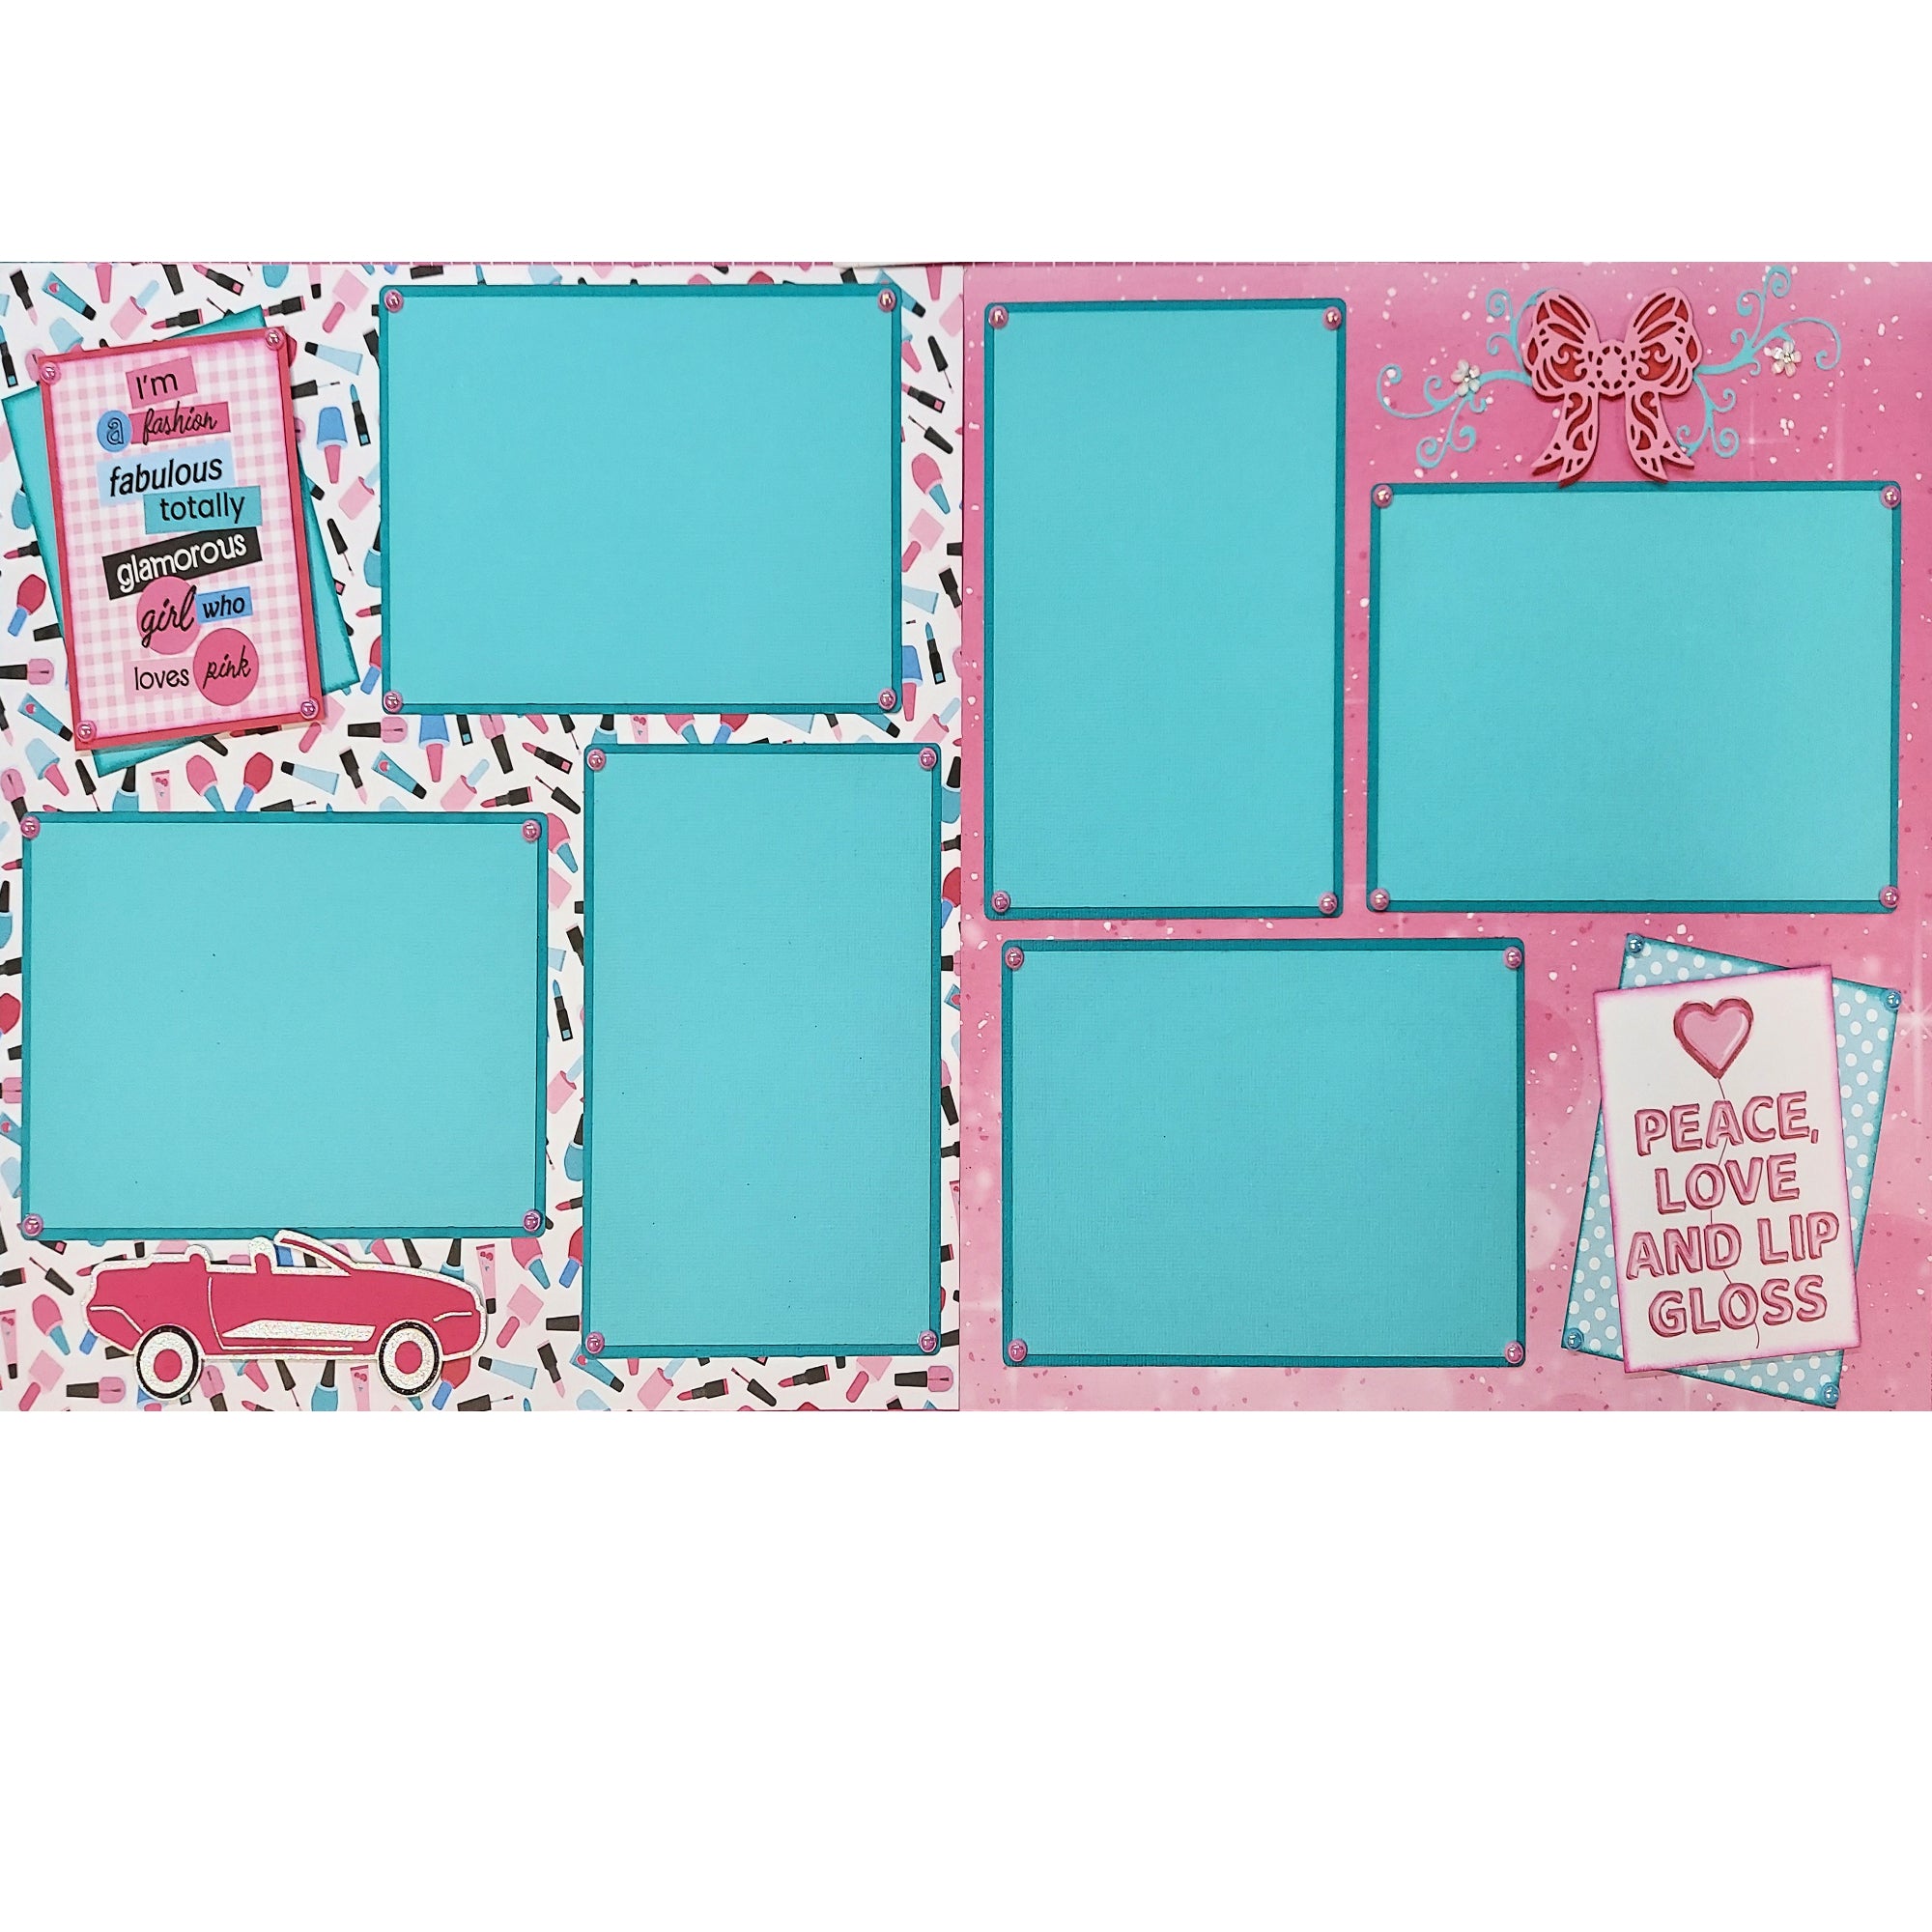 Pink Party (2) - 12 x 12 Premade, Hand-Embellished Scrapbook Pages by SSC Designs